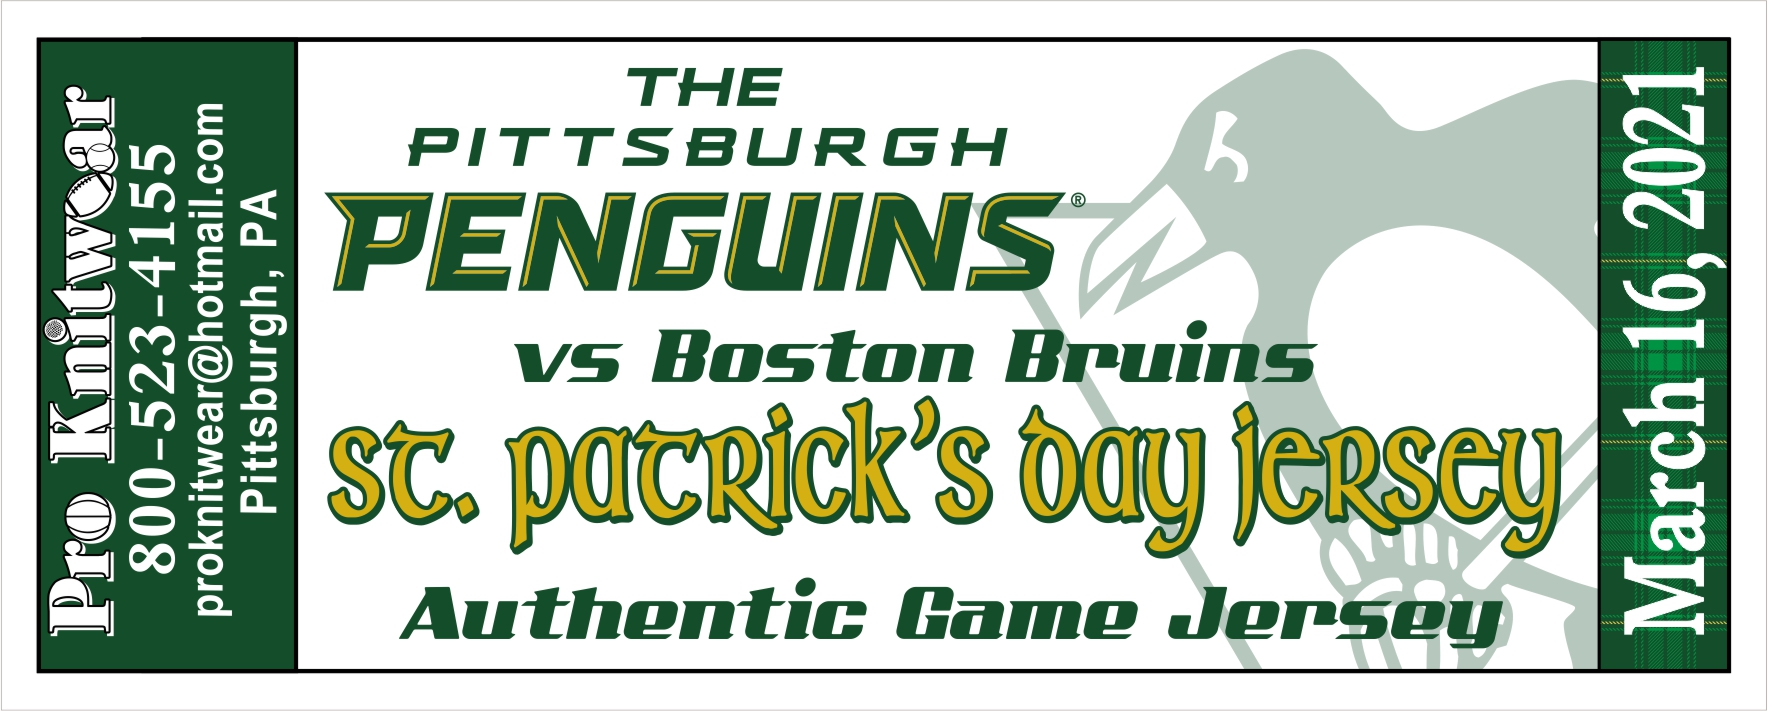 The Pittsburgh Penguins (Piongaini) go Gaelic for St. Patrick's